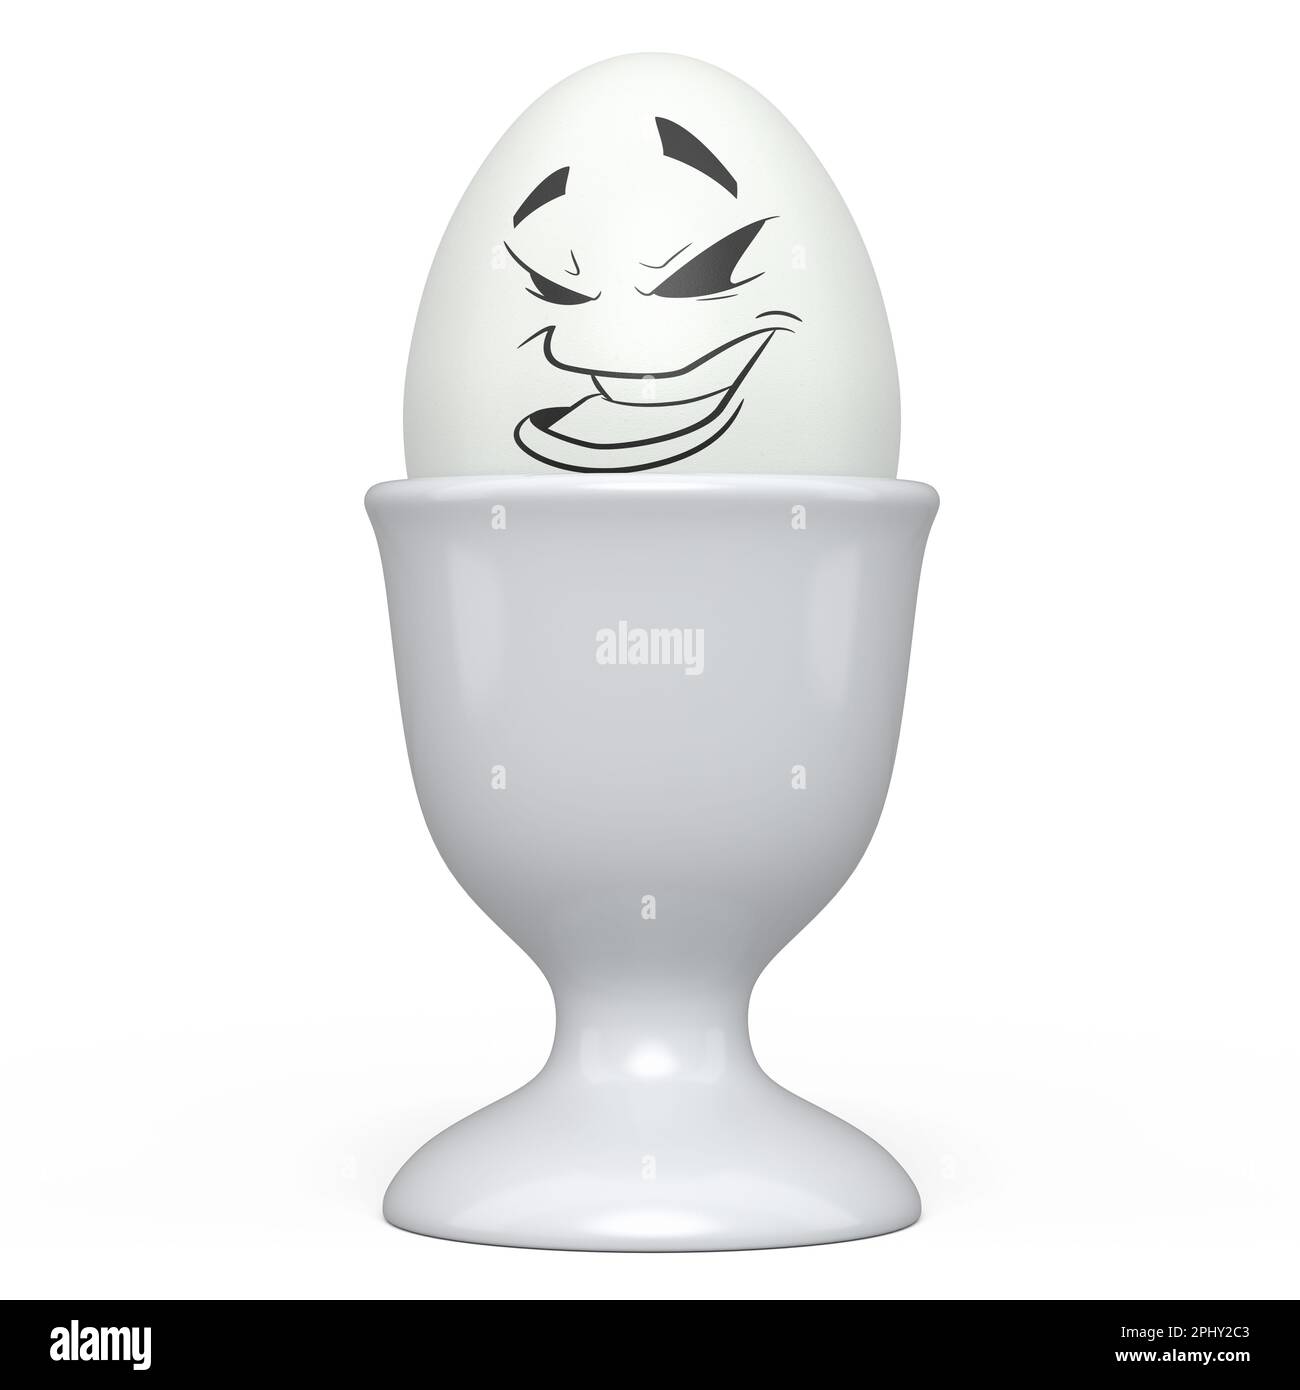 https://c8.alamy.com/comp/2PHY2C3/farm-white-painted-egg-with-expressions-and-funny-face-in-ceramic-egg-cup-for-breakfast-on-white-background-3d-render-of-easter-eggs-template-design-2PHY2C3.jpg